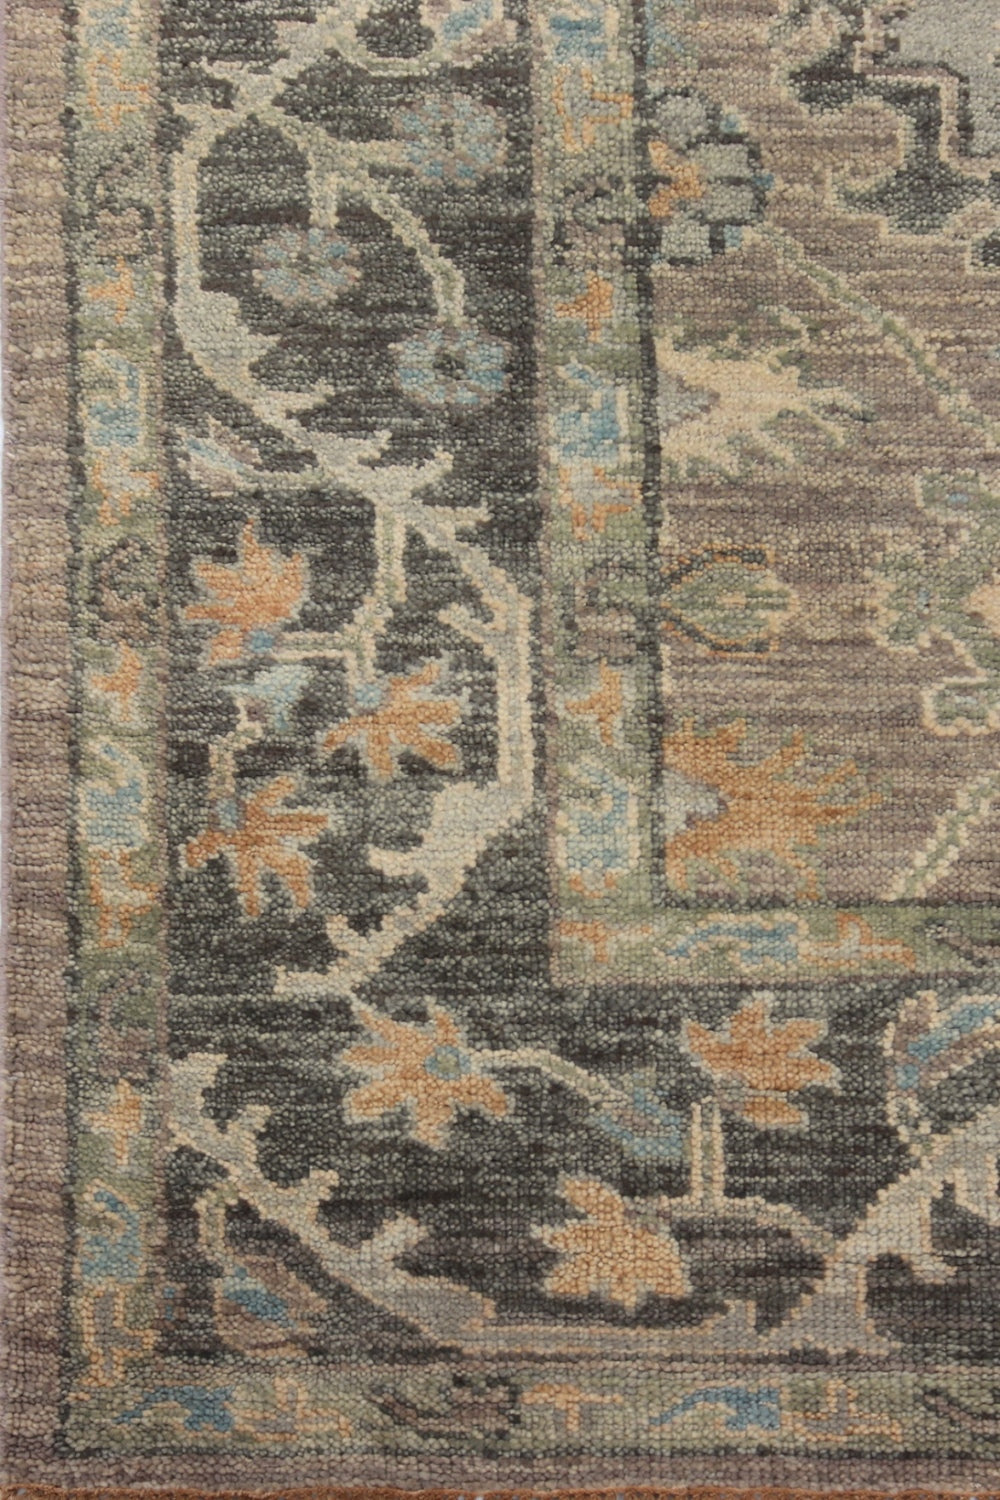 Sultanabad 2 Handwoven Traditional Rug, J71729